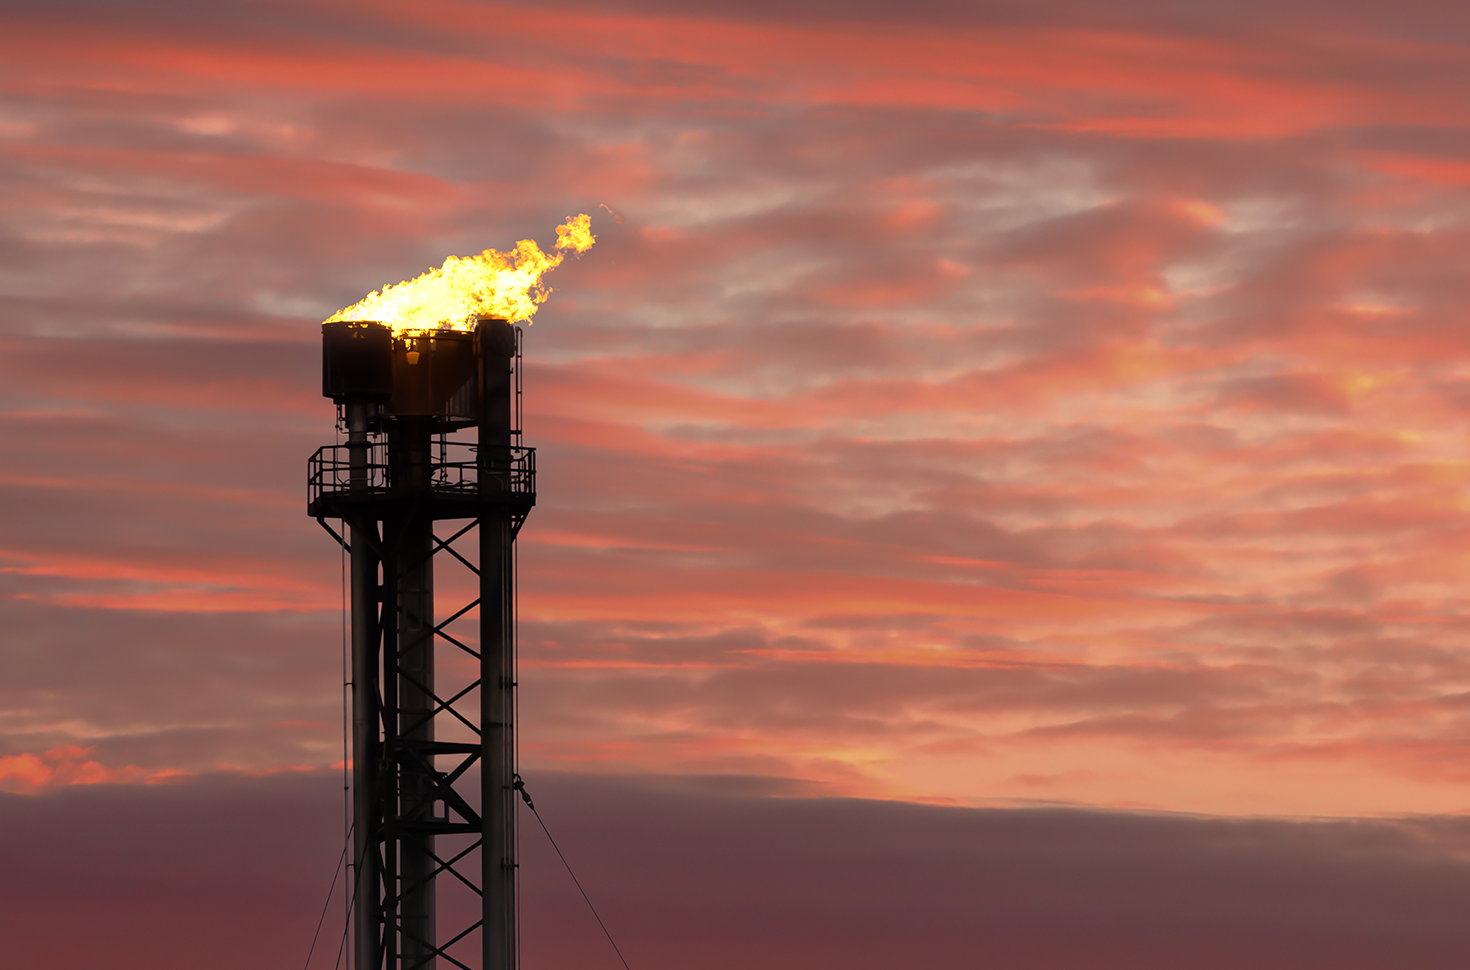 Tackling Methane Emissions is More Crucial Than Carbon Dioxide, Study Suggests